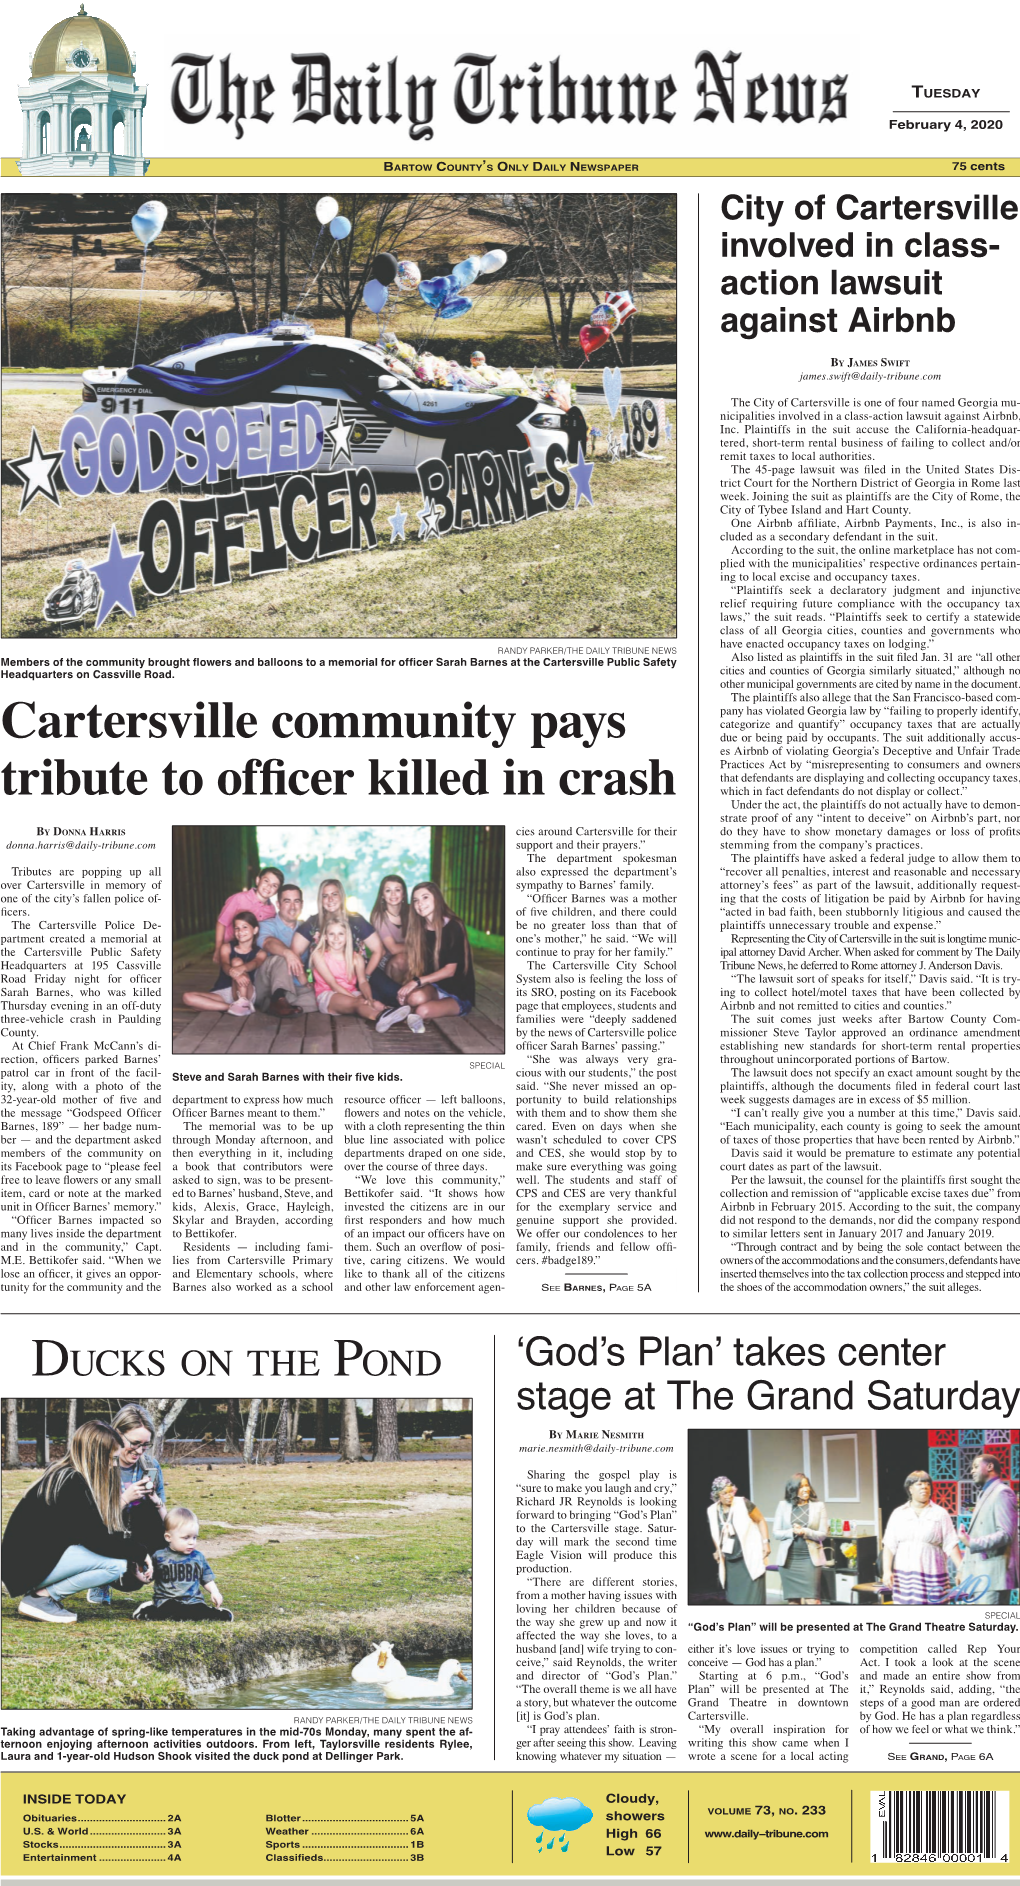 Cartersville Community Pays Tribute to Officer Killed in Crash